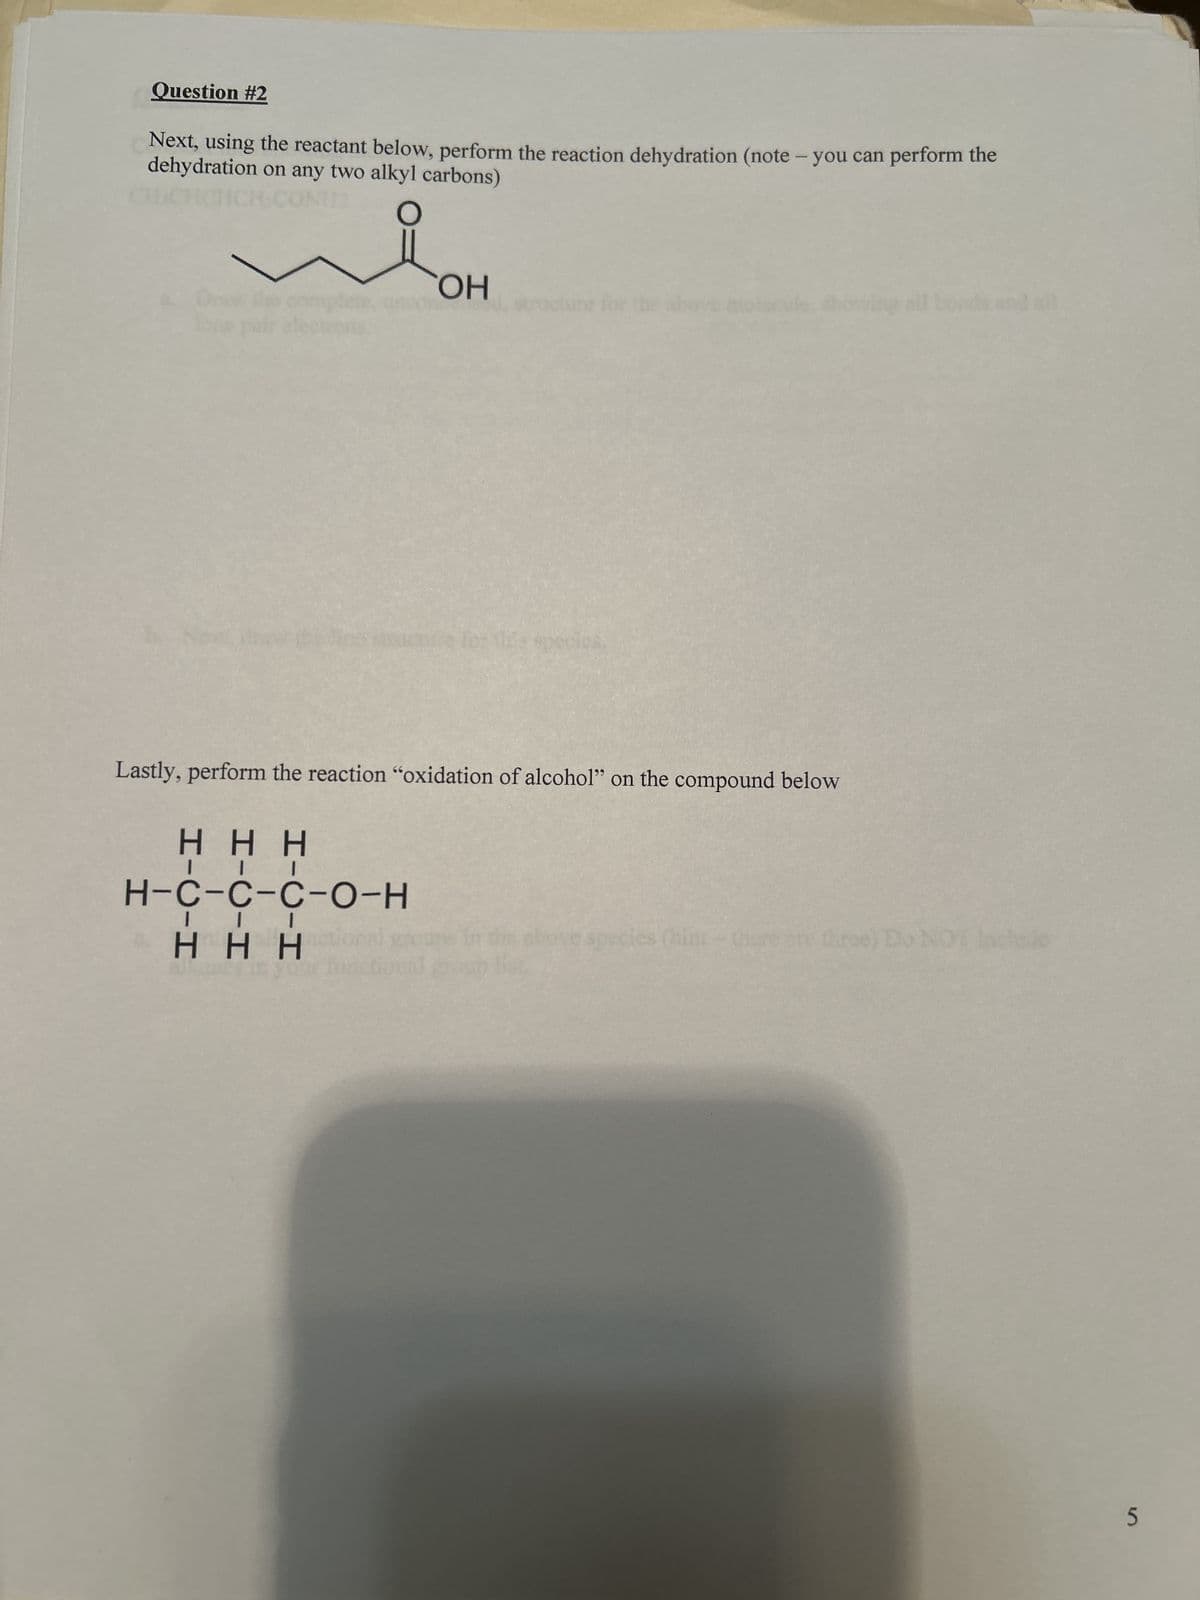 Question #2
Next, using the reactant below, perform the reaction dehydration (note - you can perform the
dehydration on any two alkyl carbons)
112
○
OH
cture for
species.
Lastly, perform the reaction "oxidation of alcohol" on the compound below
HHH
H-C-C-C-O-H
I
HHHal
les (hint
re three) Do NOT
and all
5